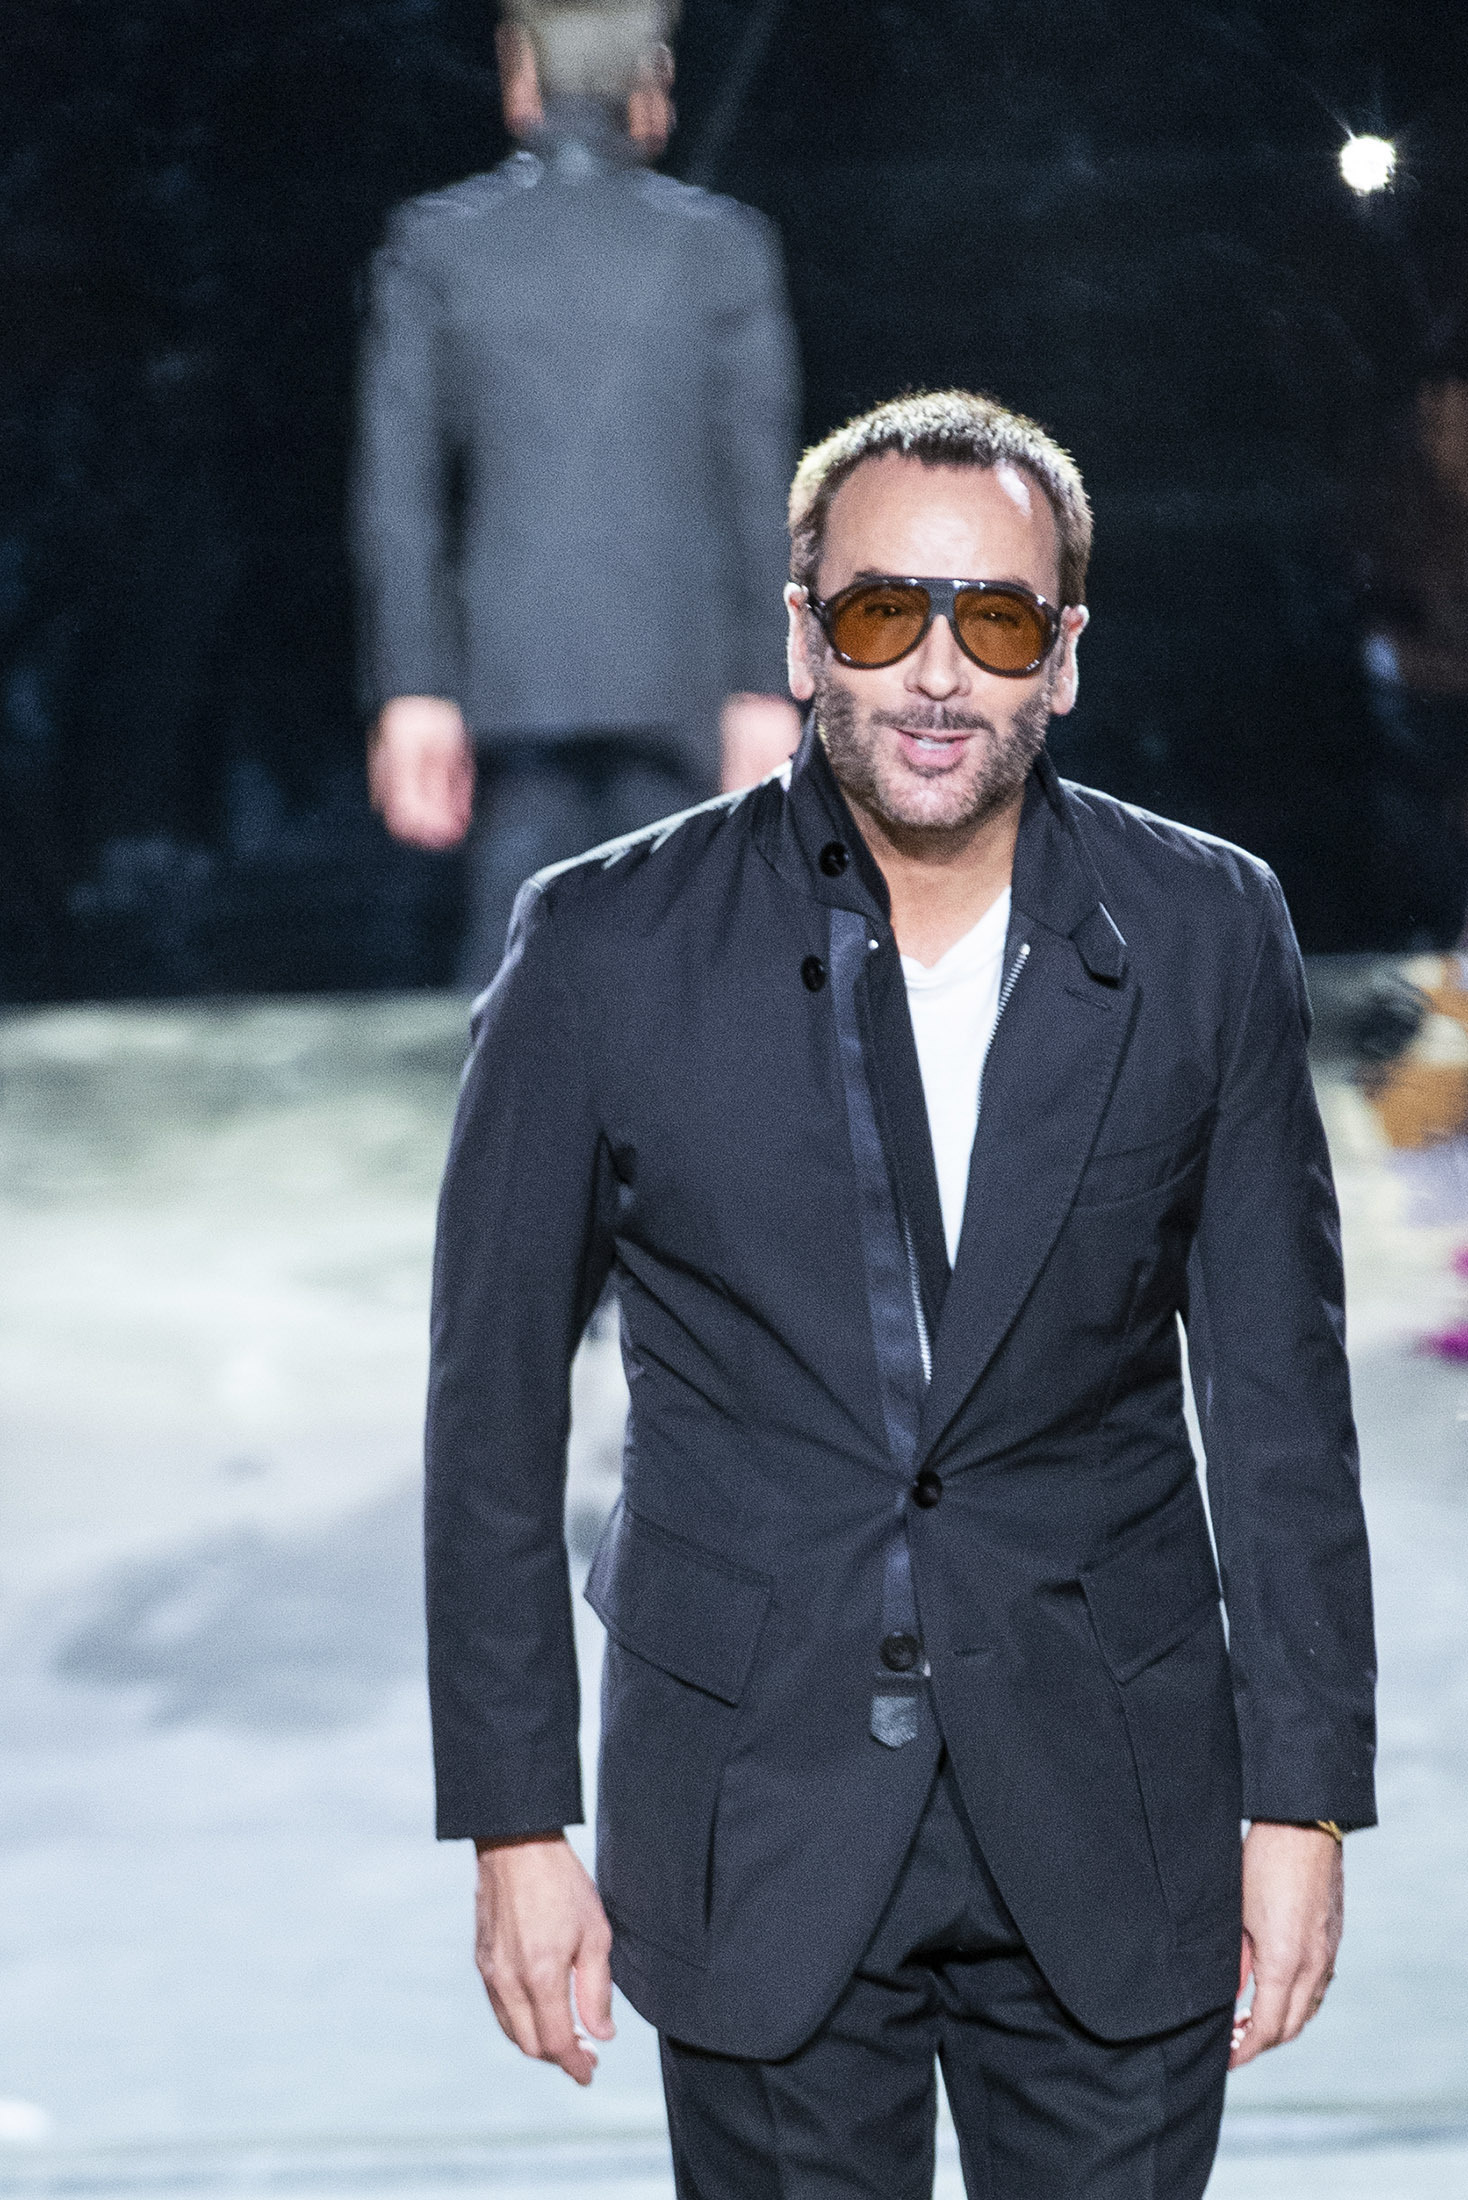 Tom Ford Wraps NY Fashion Week With a Show of Disco Glam - Bloomberg